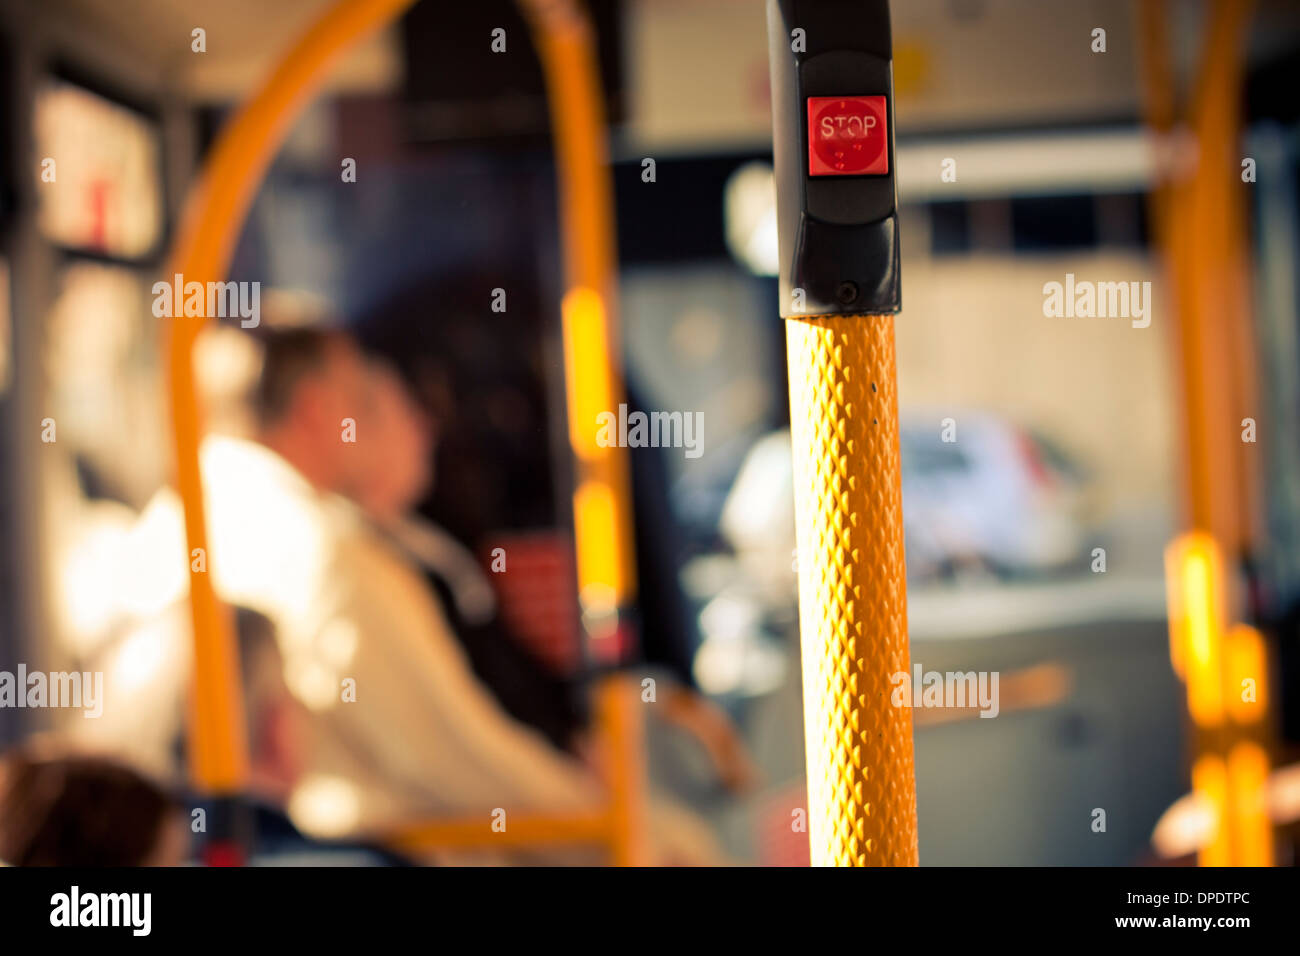 Inside public bus transport and stop button detail Stock Photo